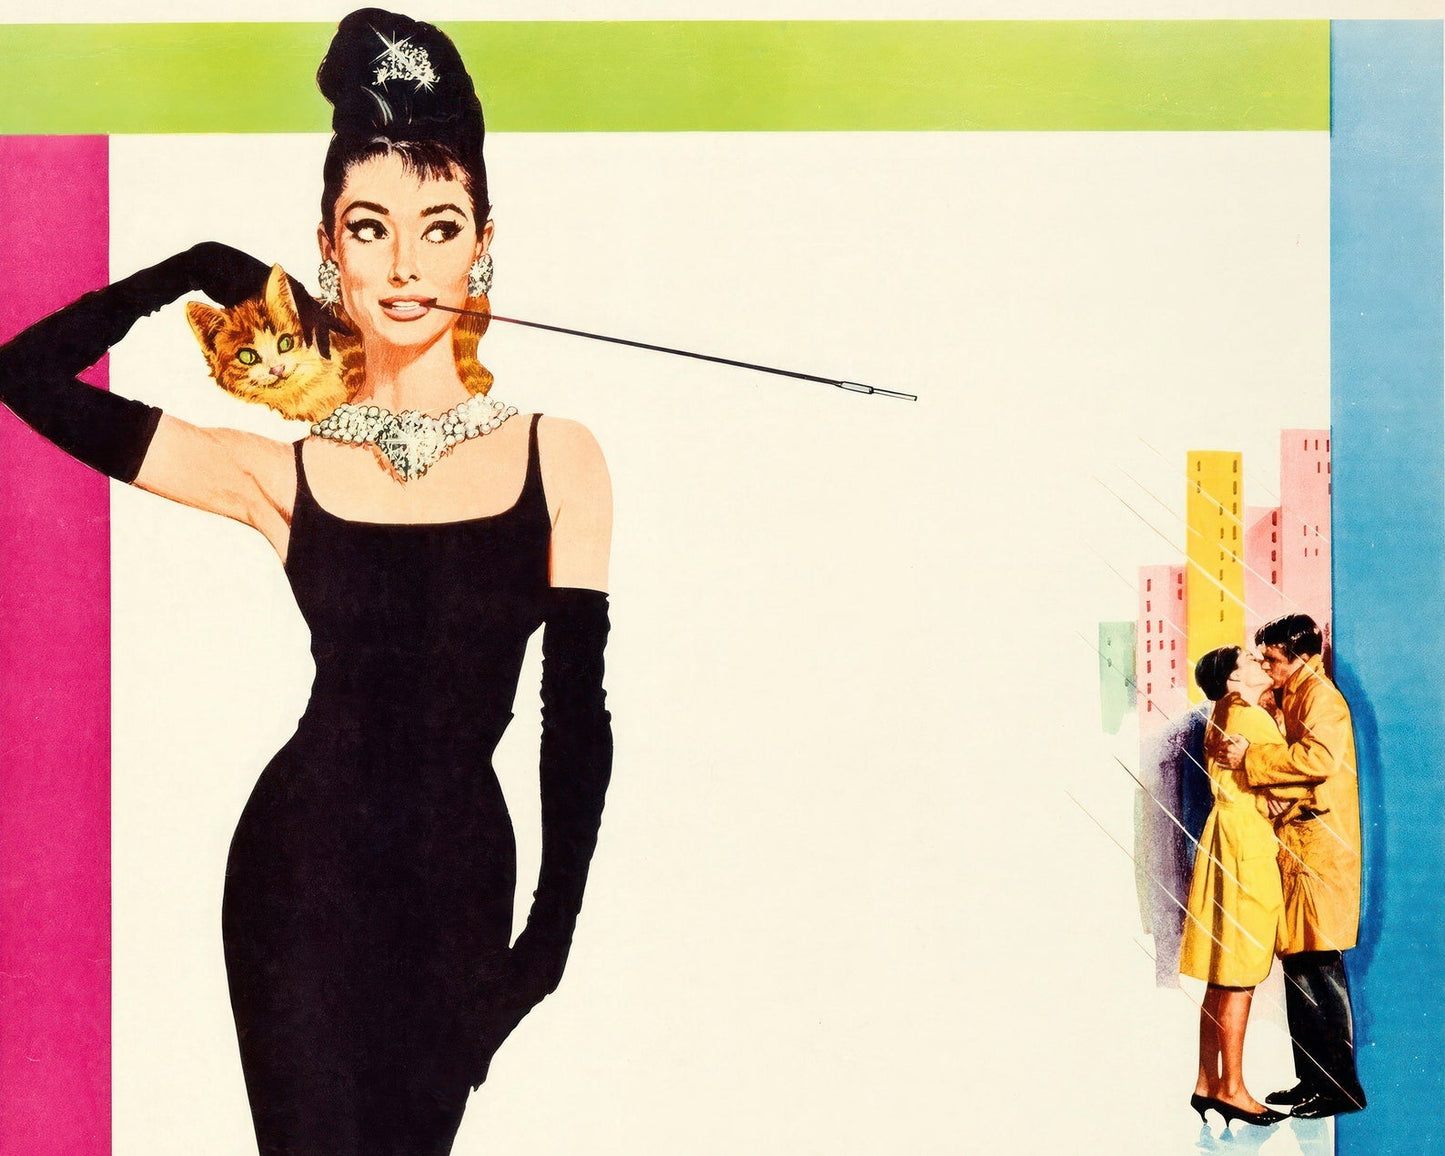 Vintage Movie Poster "Breakfast at Tiffany's" (c.1961) - Mabon Gallery